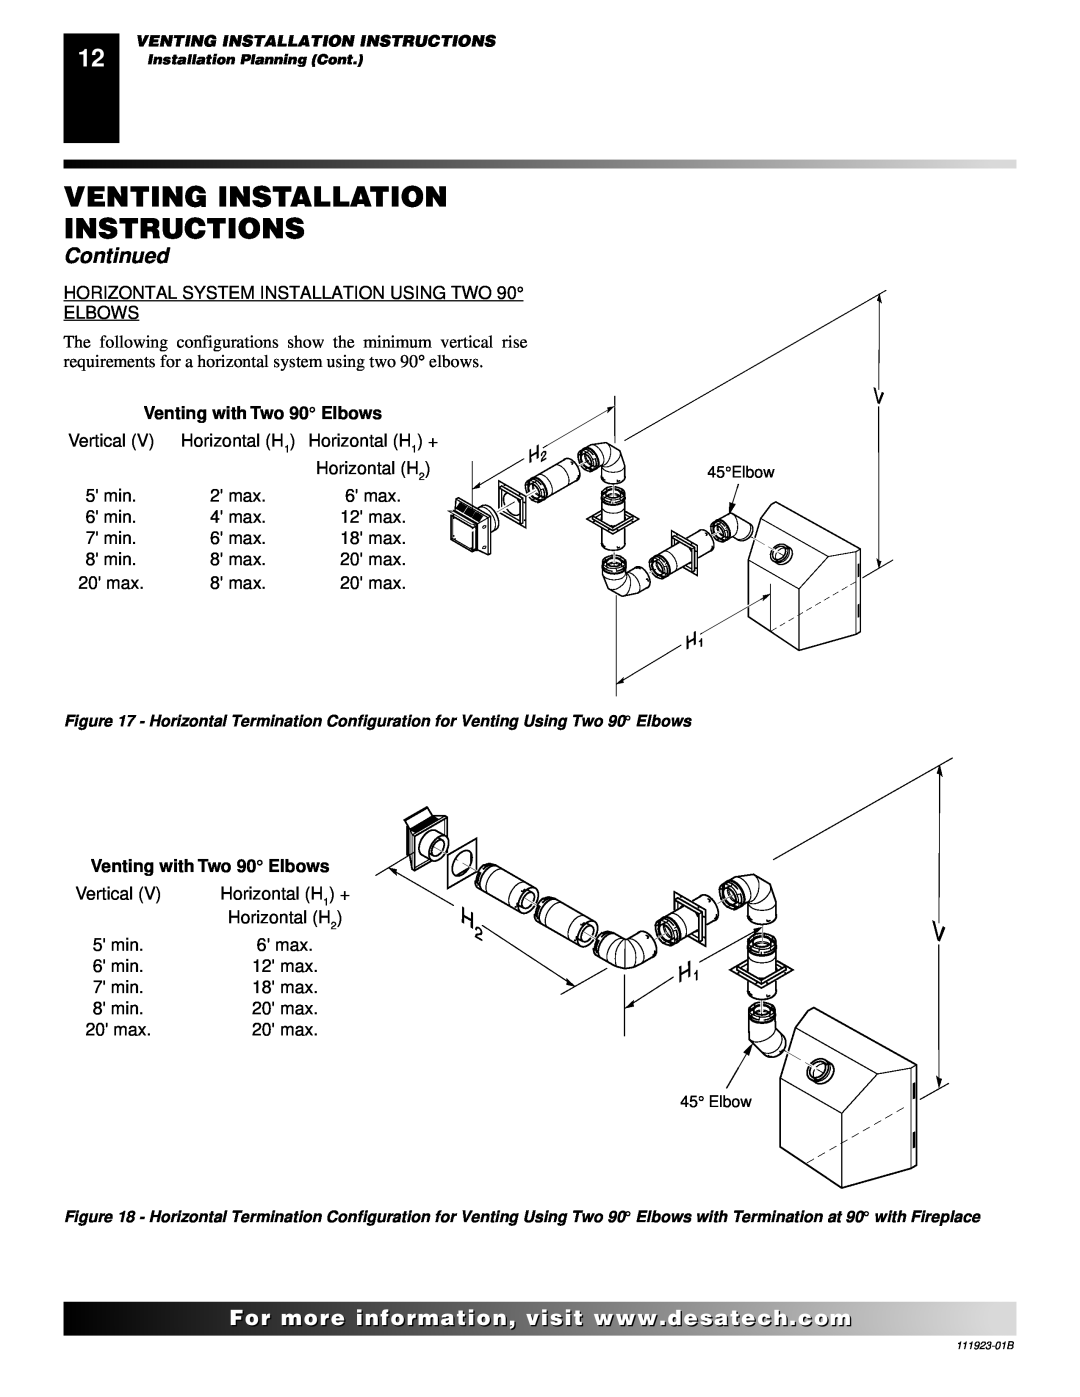 Desa (V)K36N SERIES, (V)K36P SERIES Venting Installation Instructions, Continued, Venting with Two 90 Elbows 